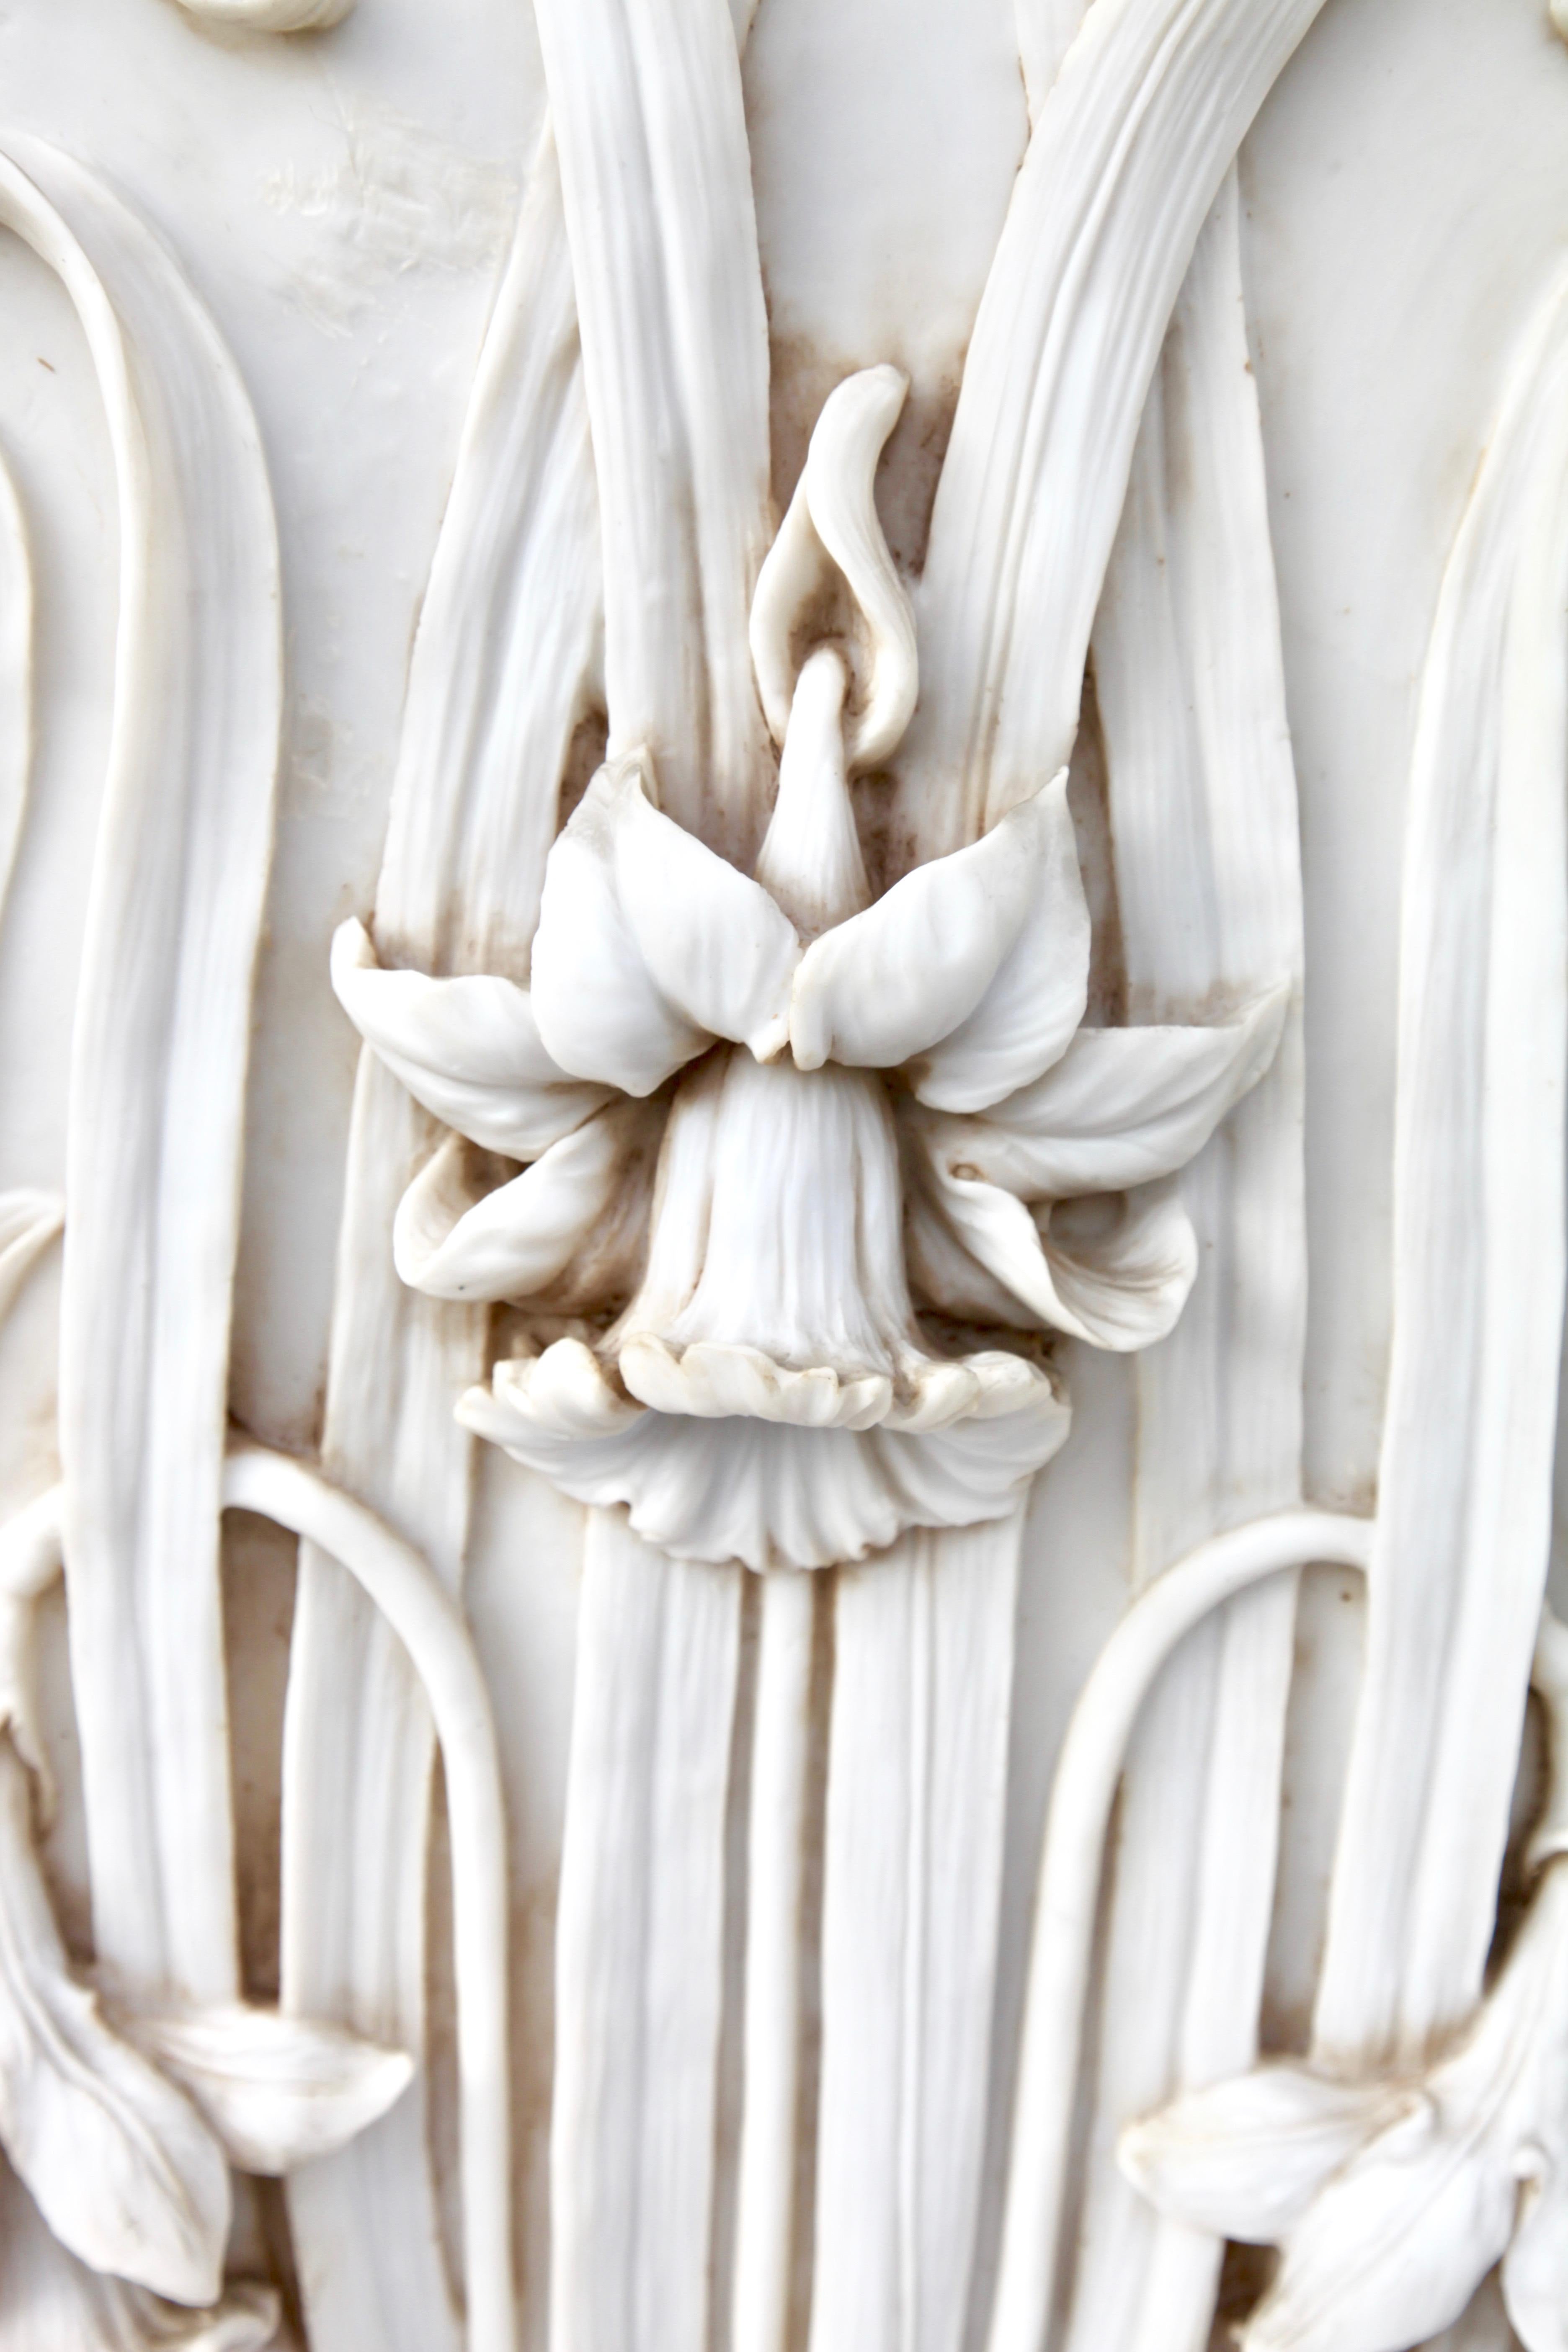 Italian Art Nouveau 3-D Alabaster Sculptural Panel with Foliage and Daffodils / Jonquils